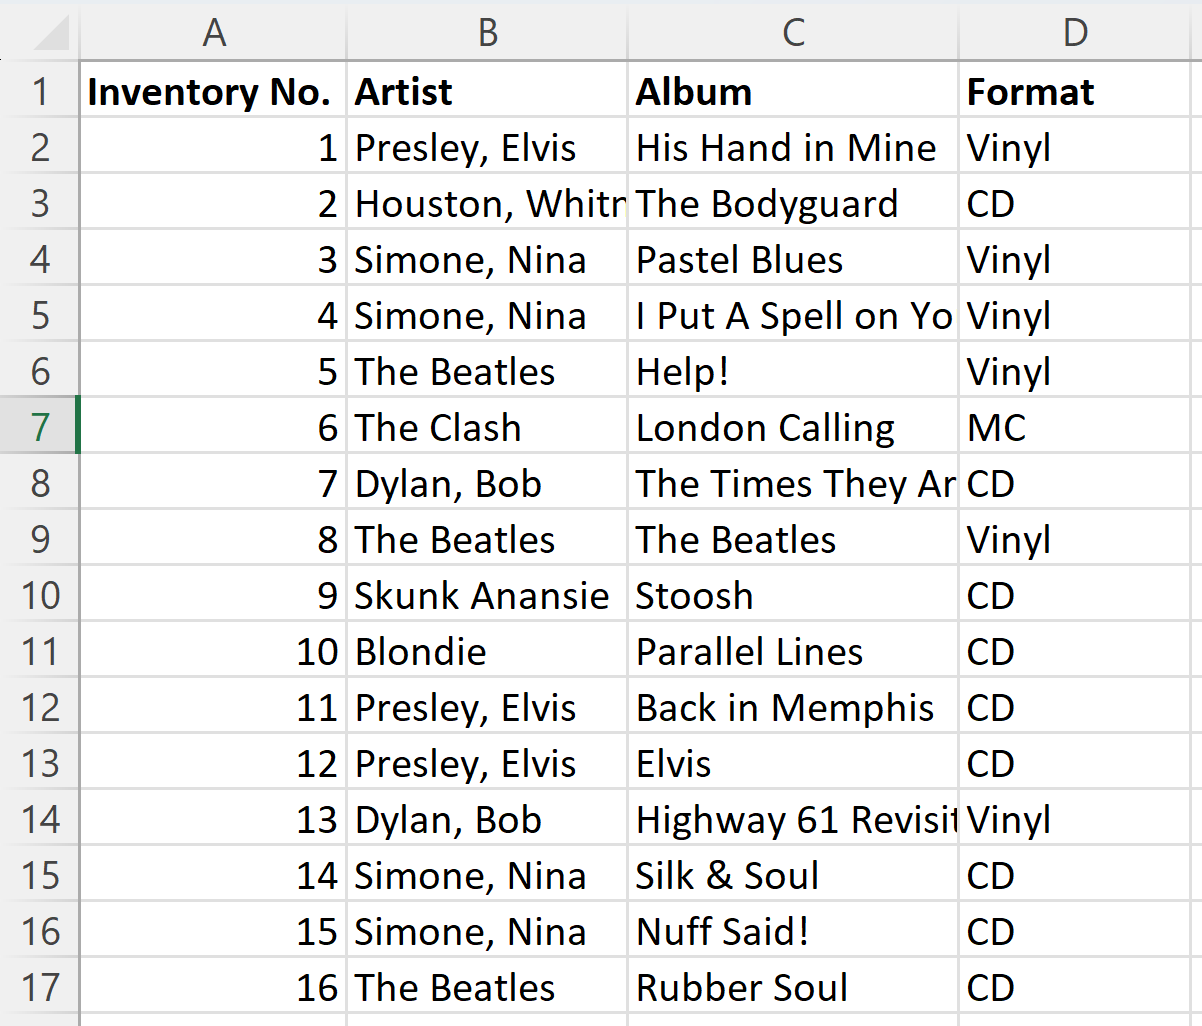 A multi-column data collection of different albums